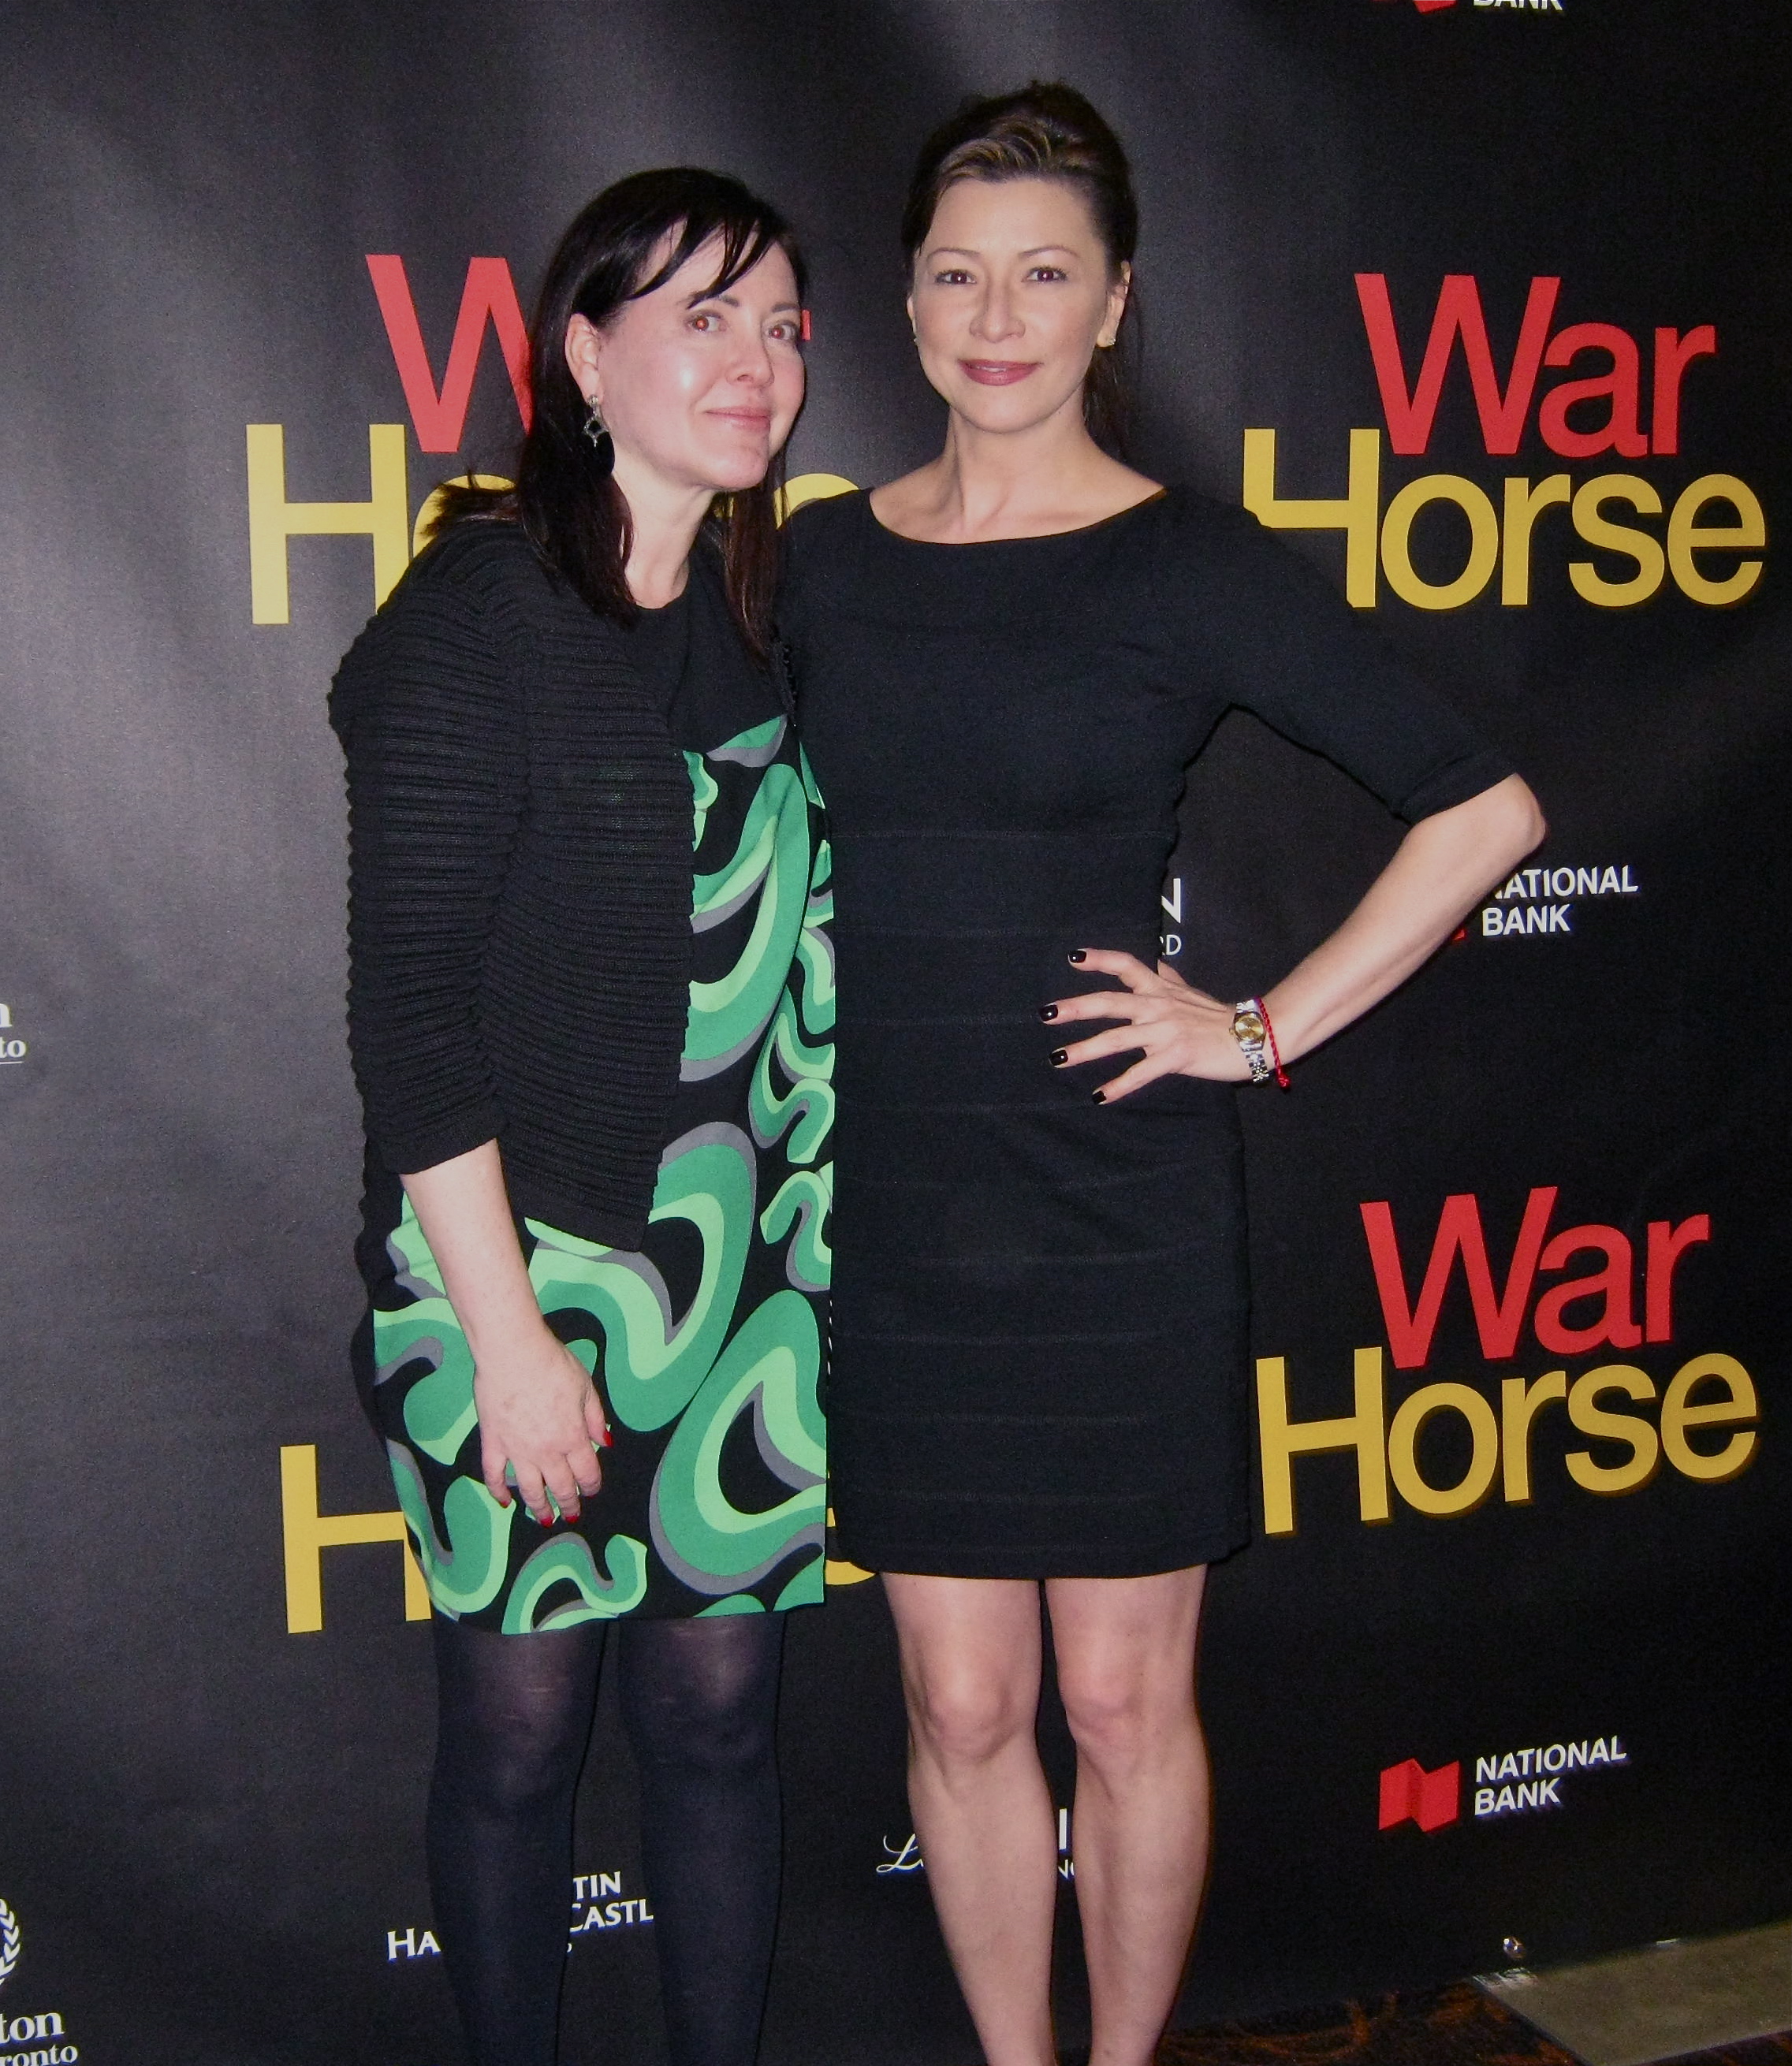 Angela Asher and Penny Noble Opening Night of War Horse